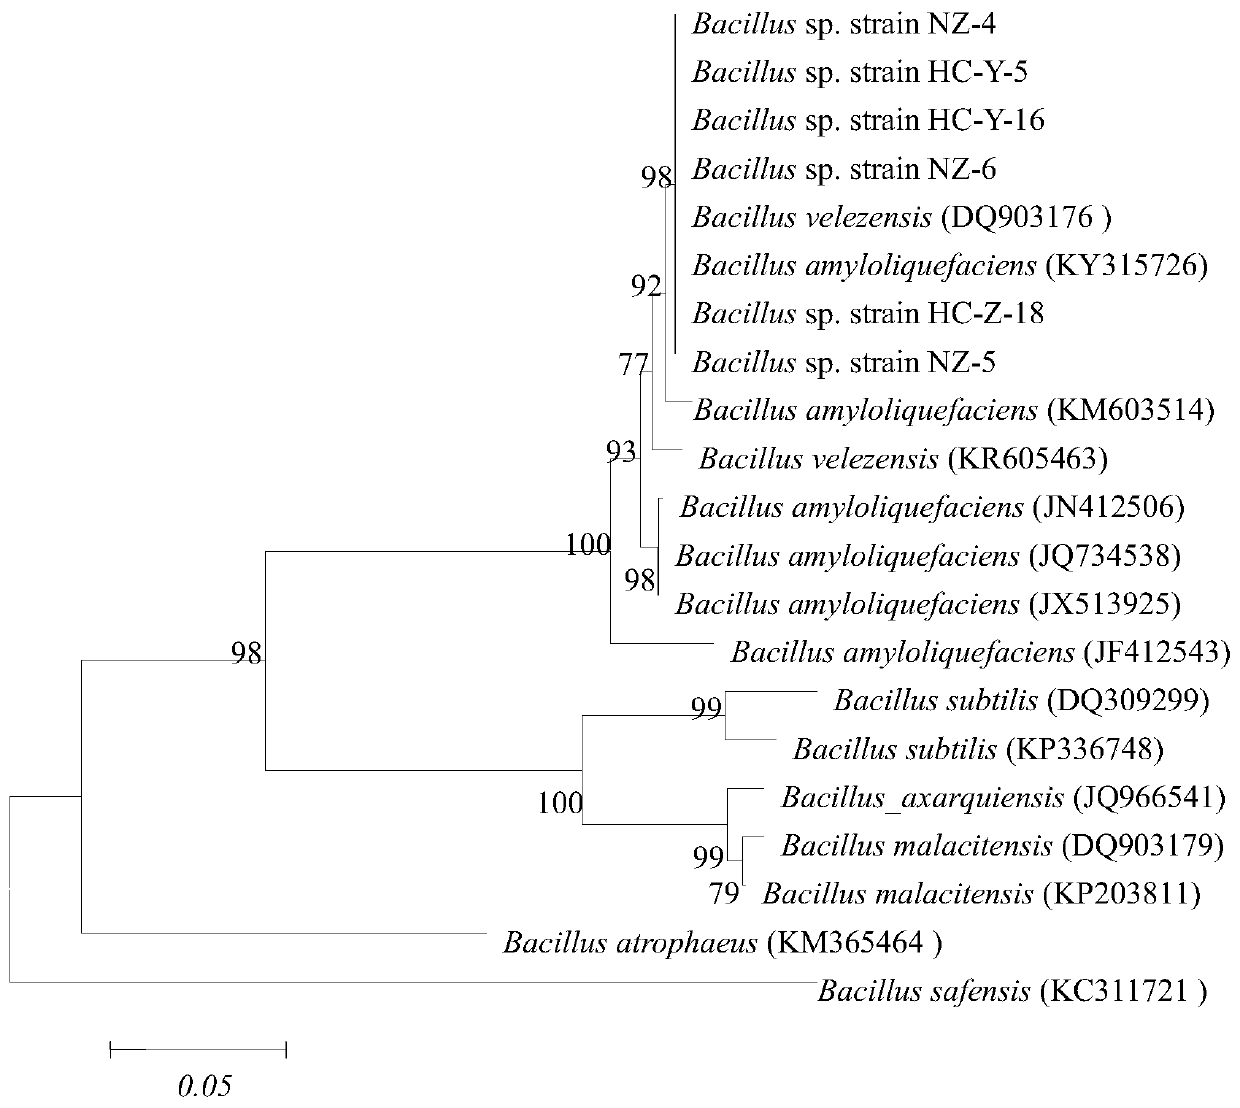 Application of Bacillus Velez nz-4 in promoting plant growth